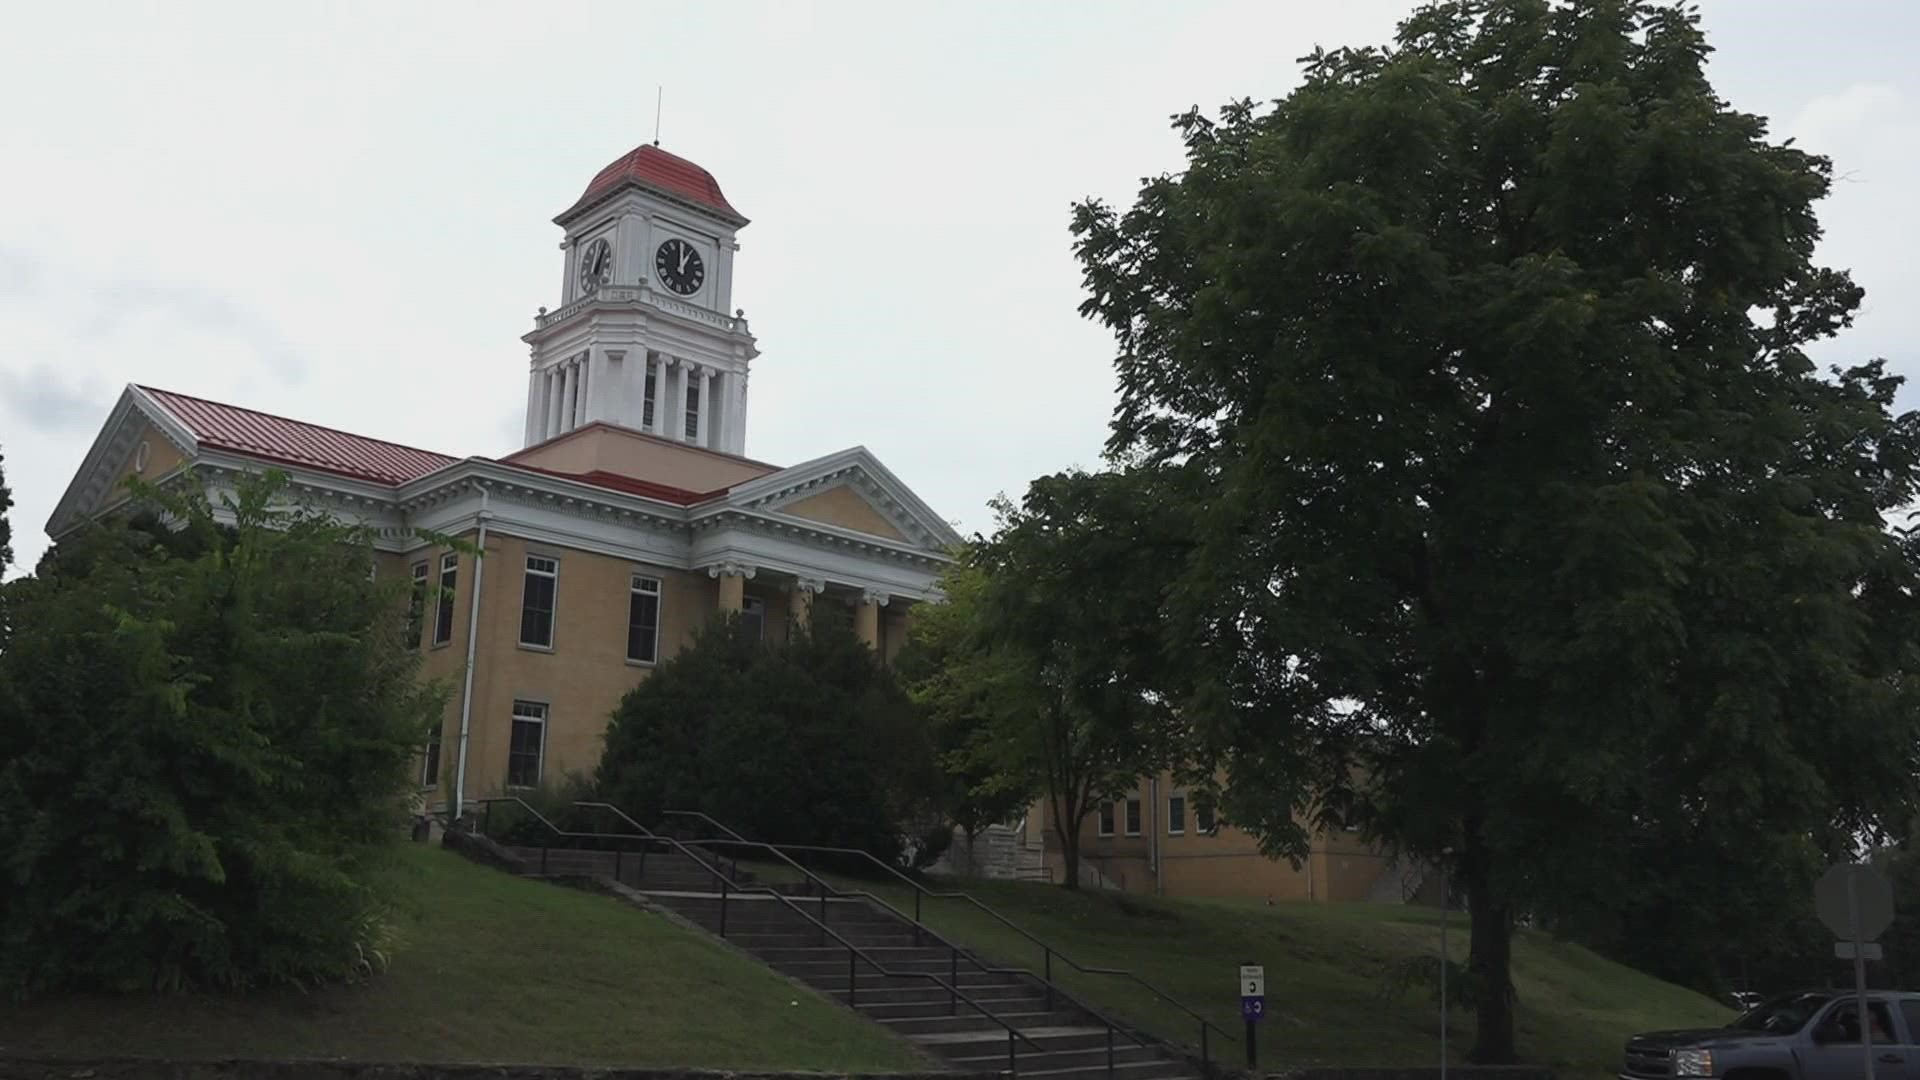 From the historic Blount County Courthouse to former Tennessee Governor and U.S. Senator Lamar Alexander, famous places and people call Maryville home.